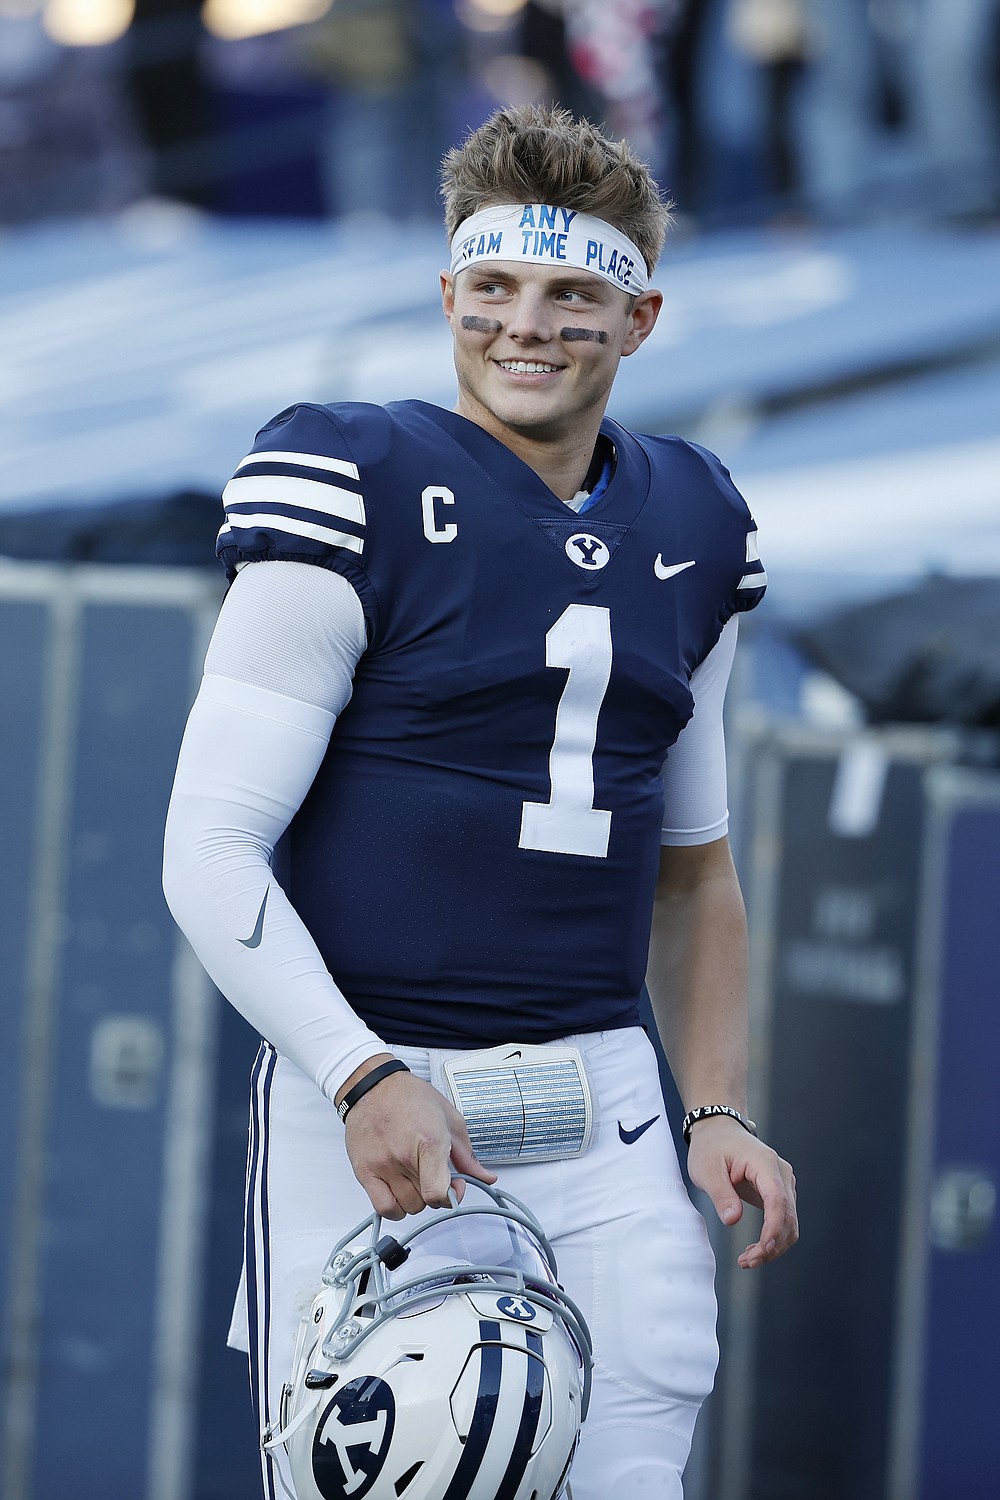 BYU quarterback Zach Wilson (1) reacts after their win over North Alabama in an NCAA college football game Saturday, Nov. 21, 2020, in Provo, Utah. (AP Photo/Jeff Swinger, Pool)